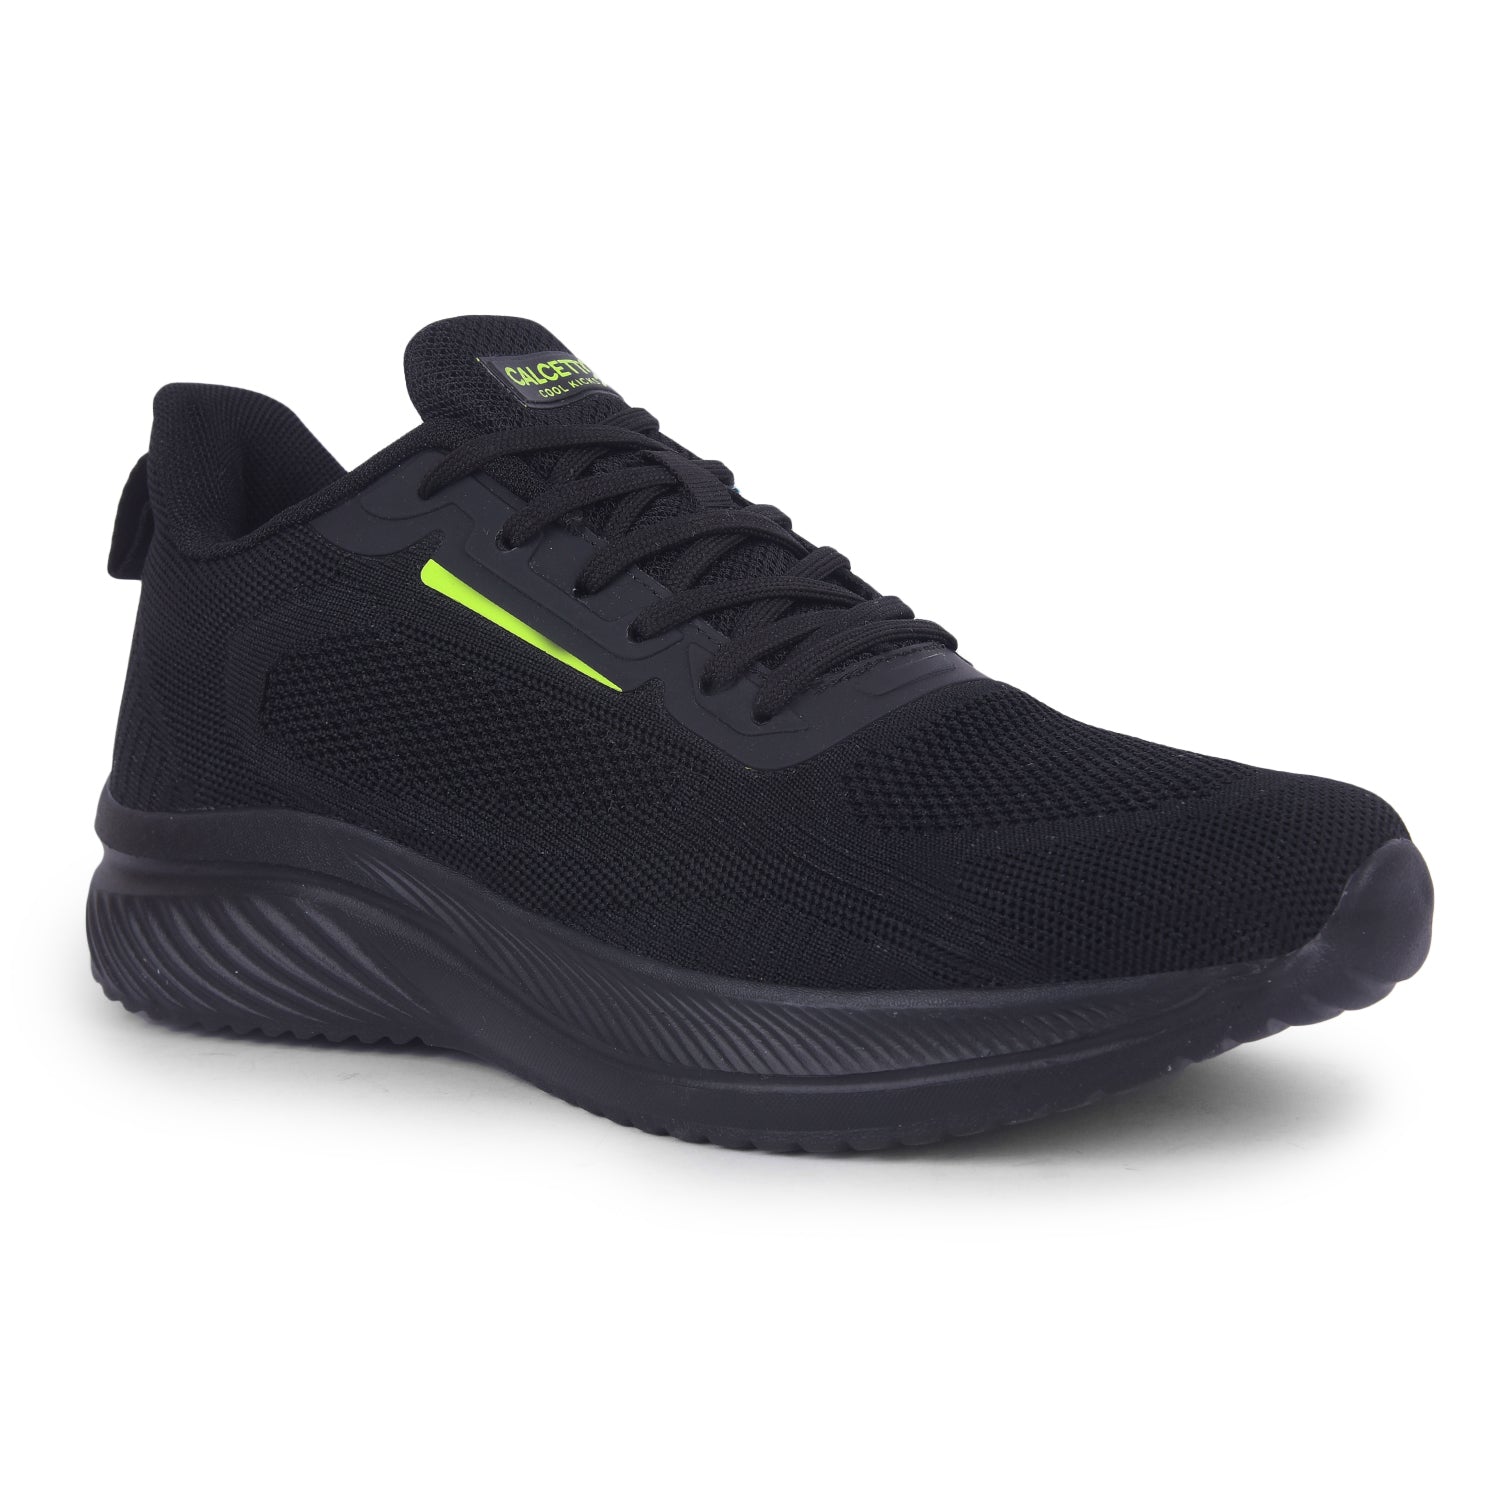 Calcetto CLT-2046 Black Lime Sports Shoes For Men